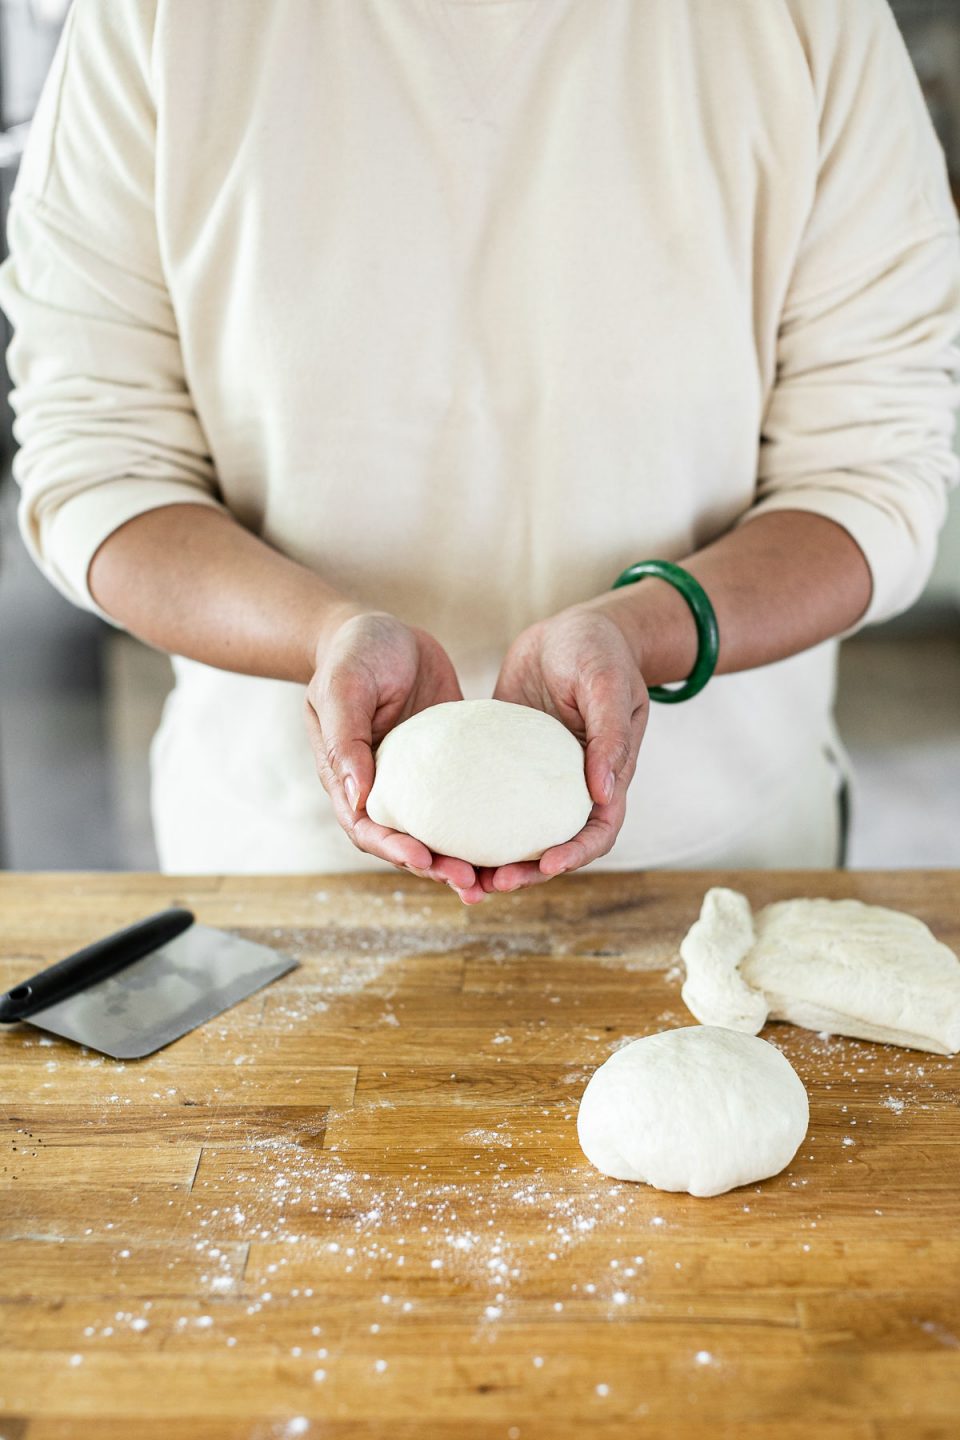 How to shape pizza dough balls: Jess, shown in a white sweatshirt, stands behind a butcher block counter dusted in flour. Jess holds up a formed pizza dough ball in her hands.